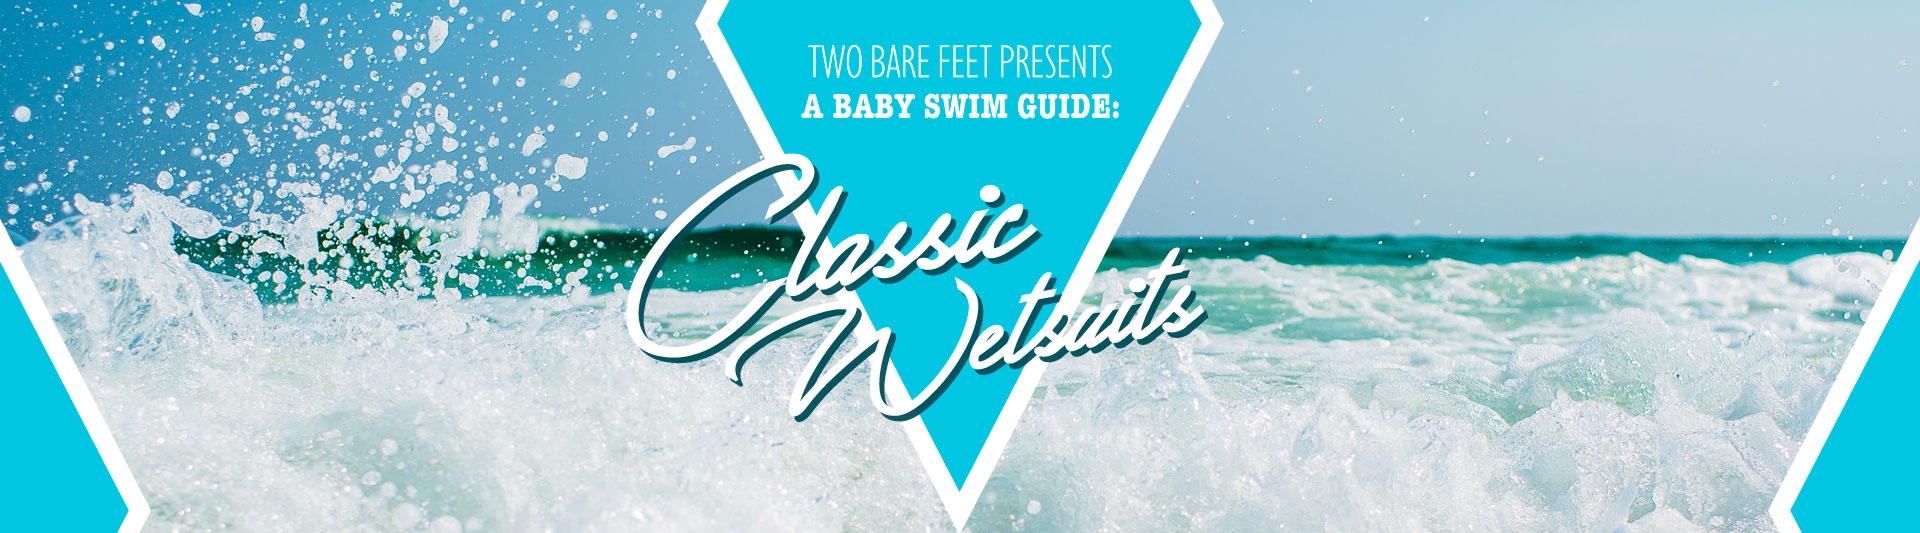 Classic Baby Wetsuit Sets banner